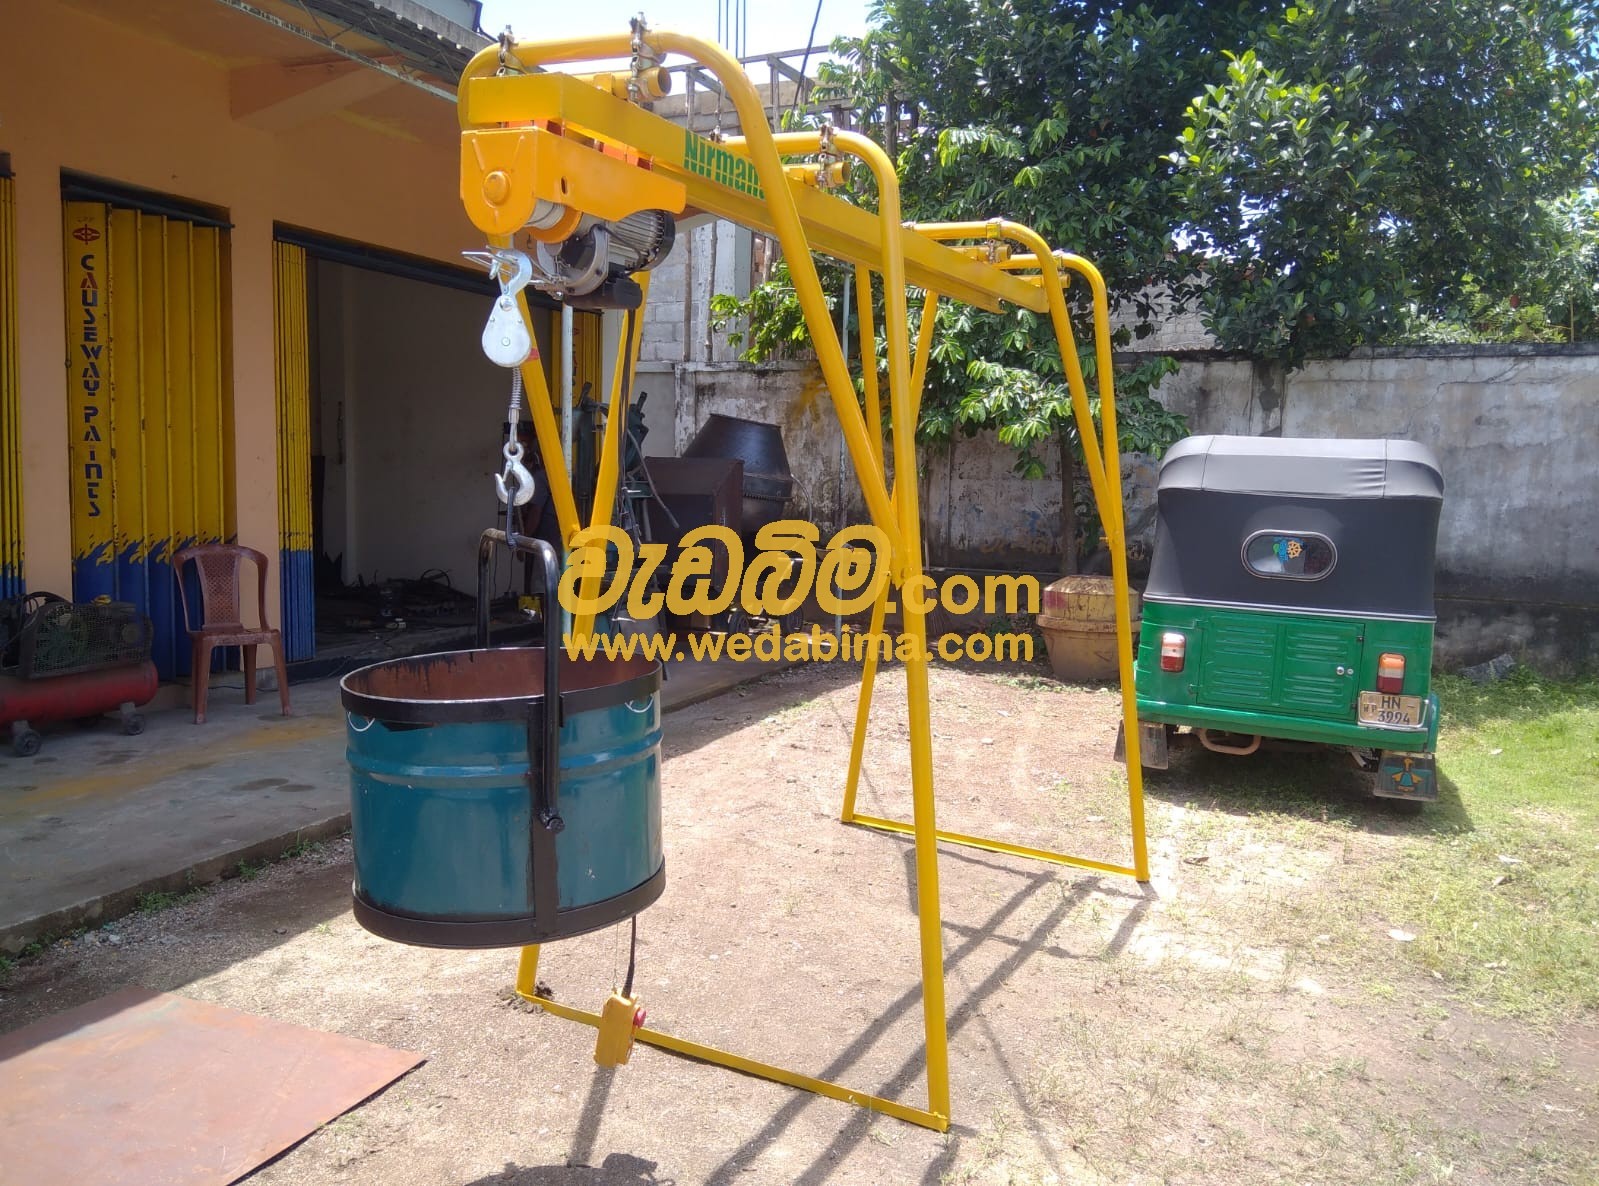 Cover image for Hoist machine for rent in Galle